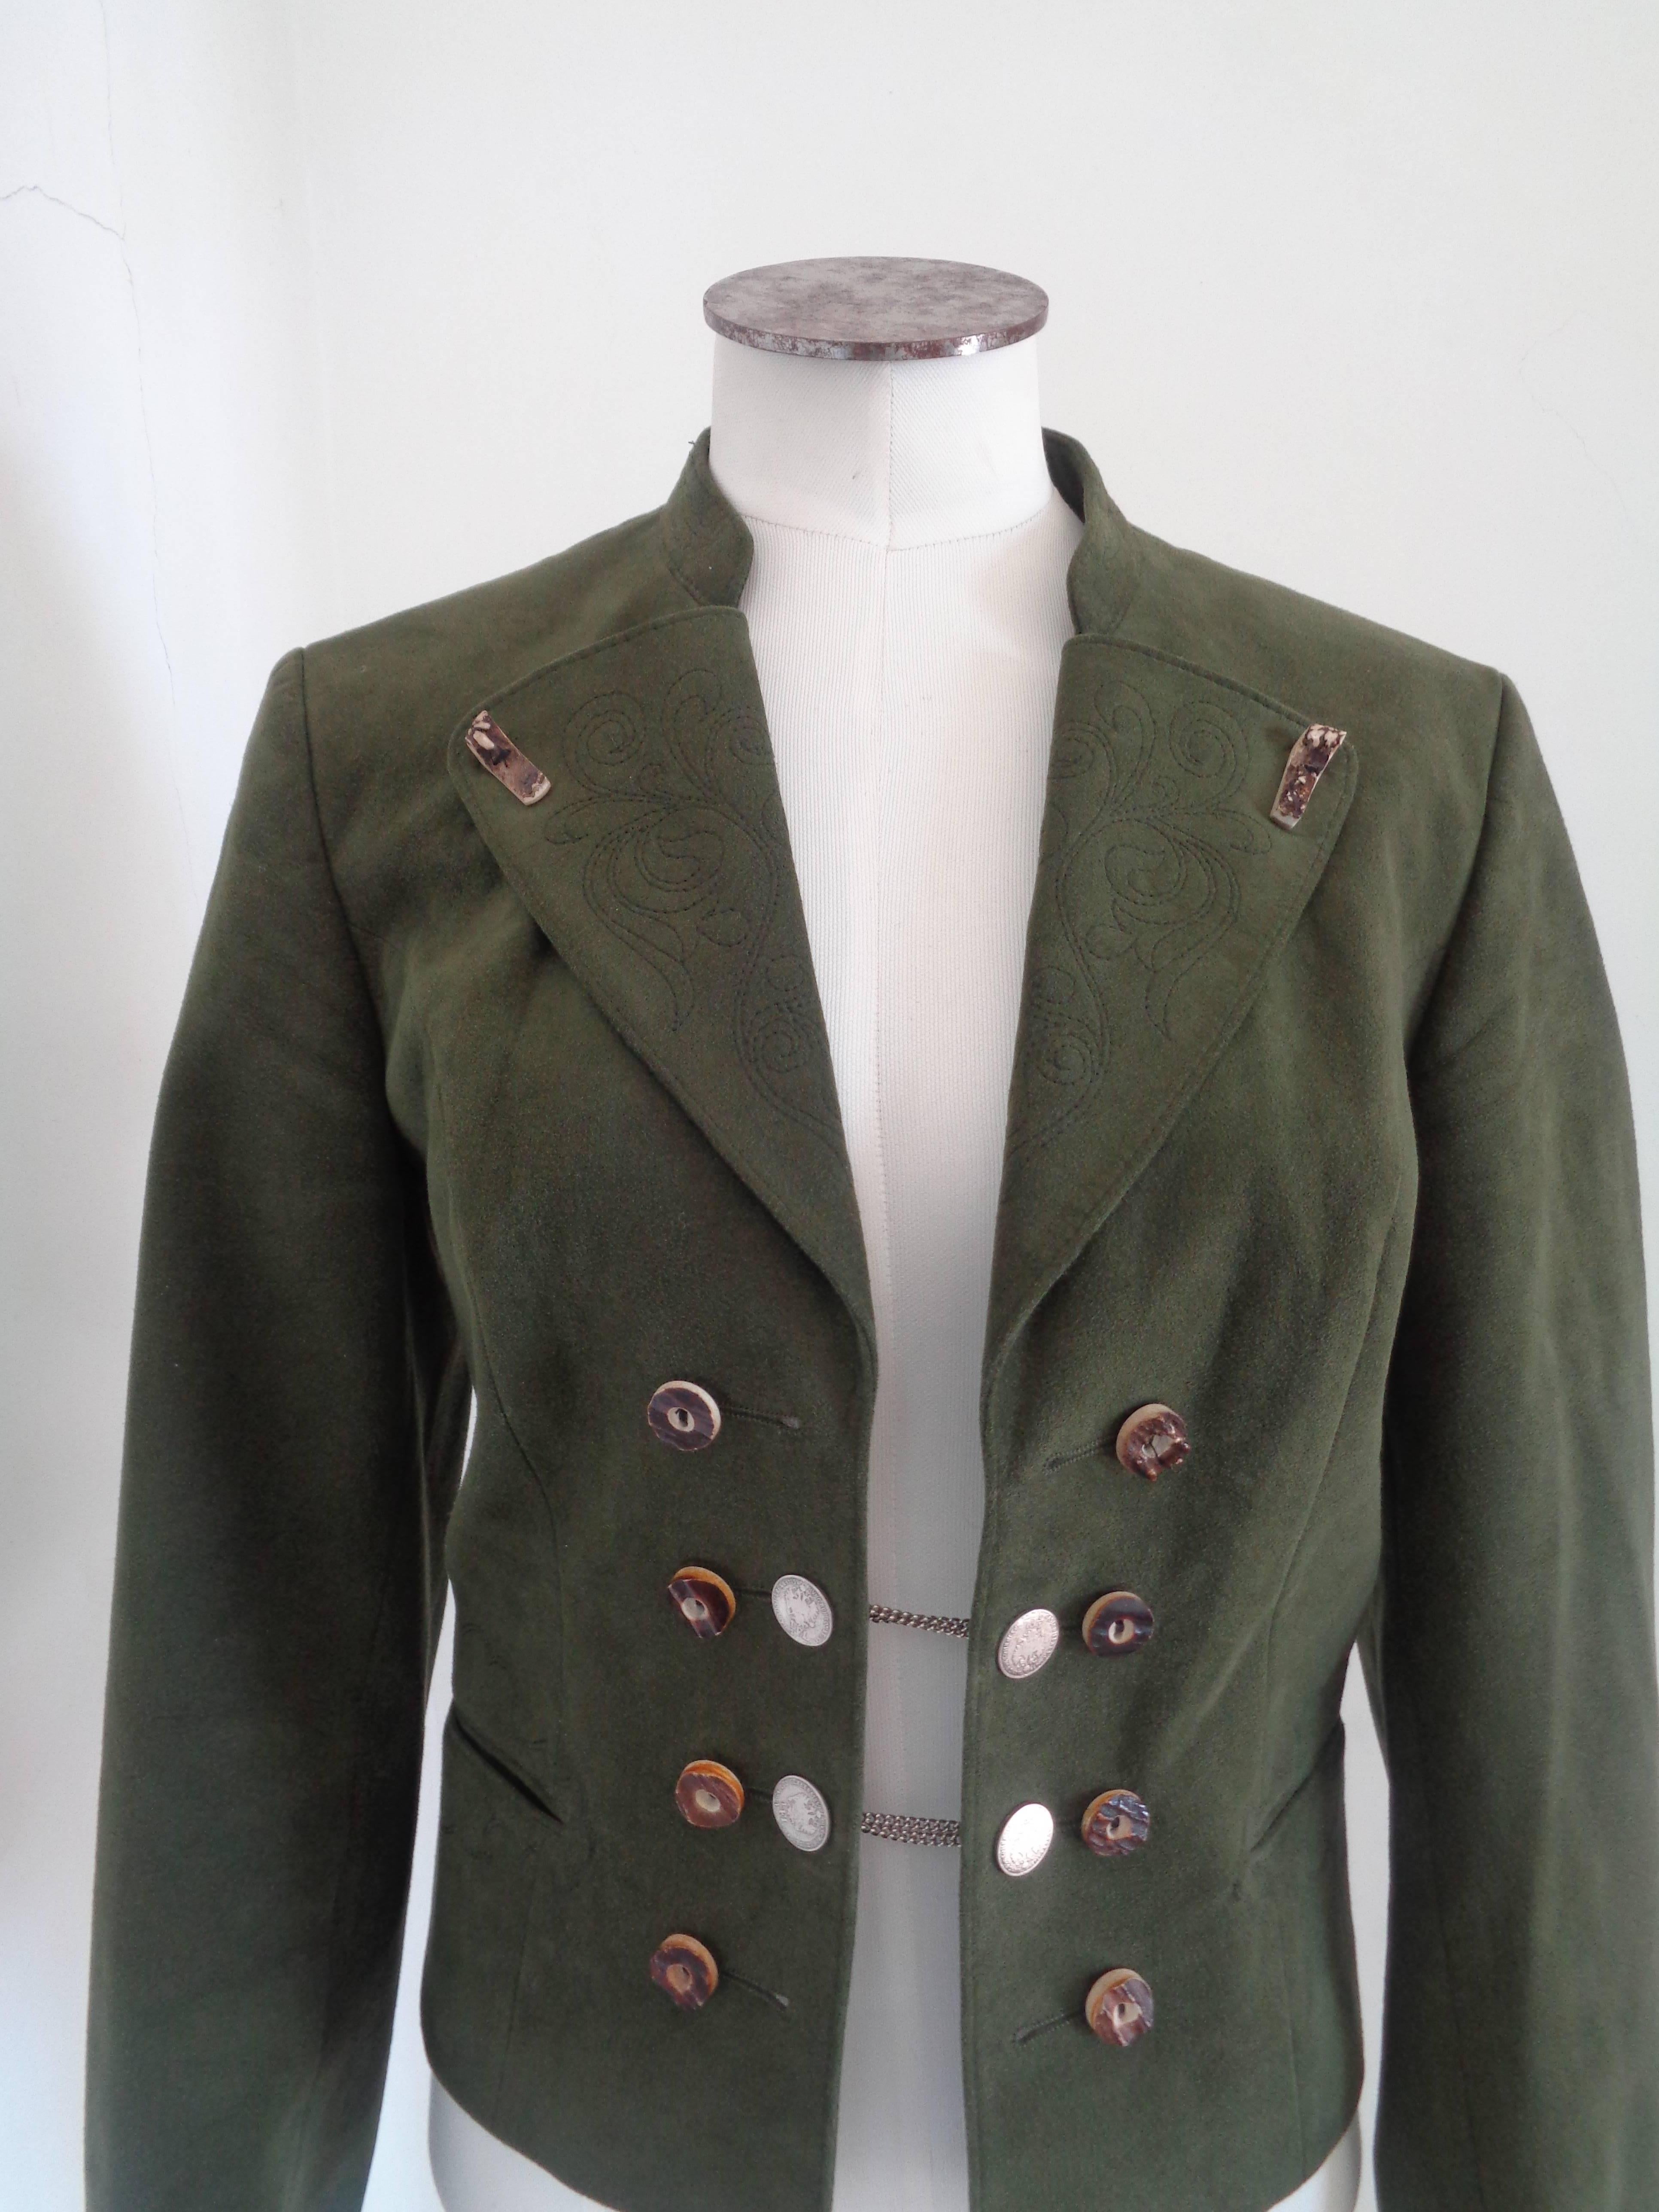 1980s Model Loden Frey Green Jacket

Totally made in austria for ther 25th year anniversary of the brand
Embellished with silver tone hardware

Composition: Viscose and others

